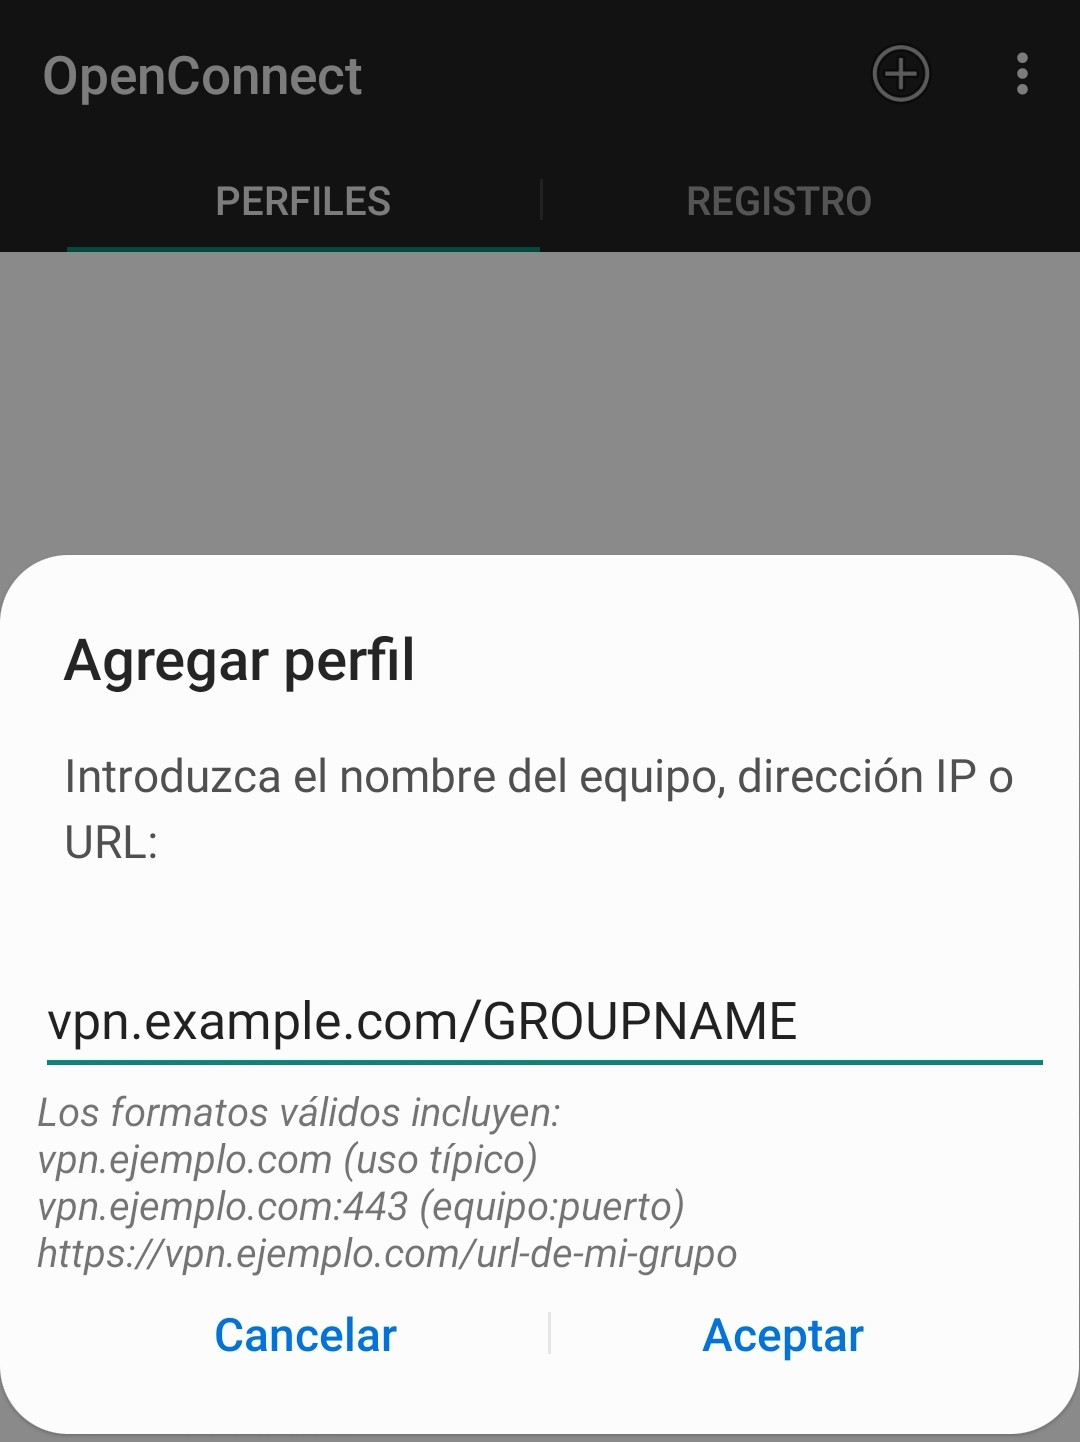 First attachment: OpenVPN request the url server like an endpoint, not only a domain or IP server.